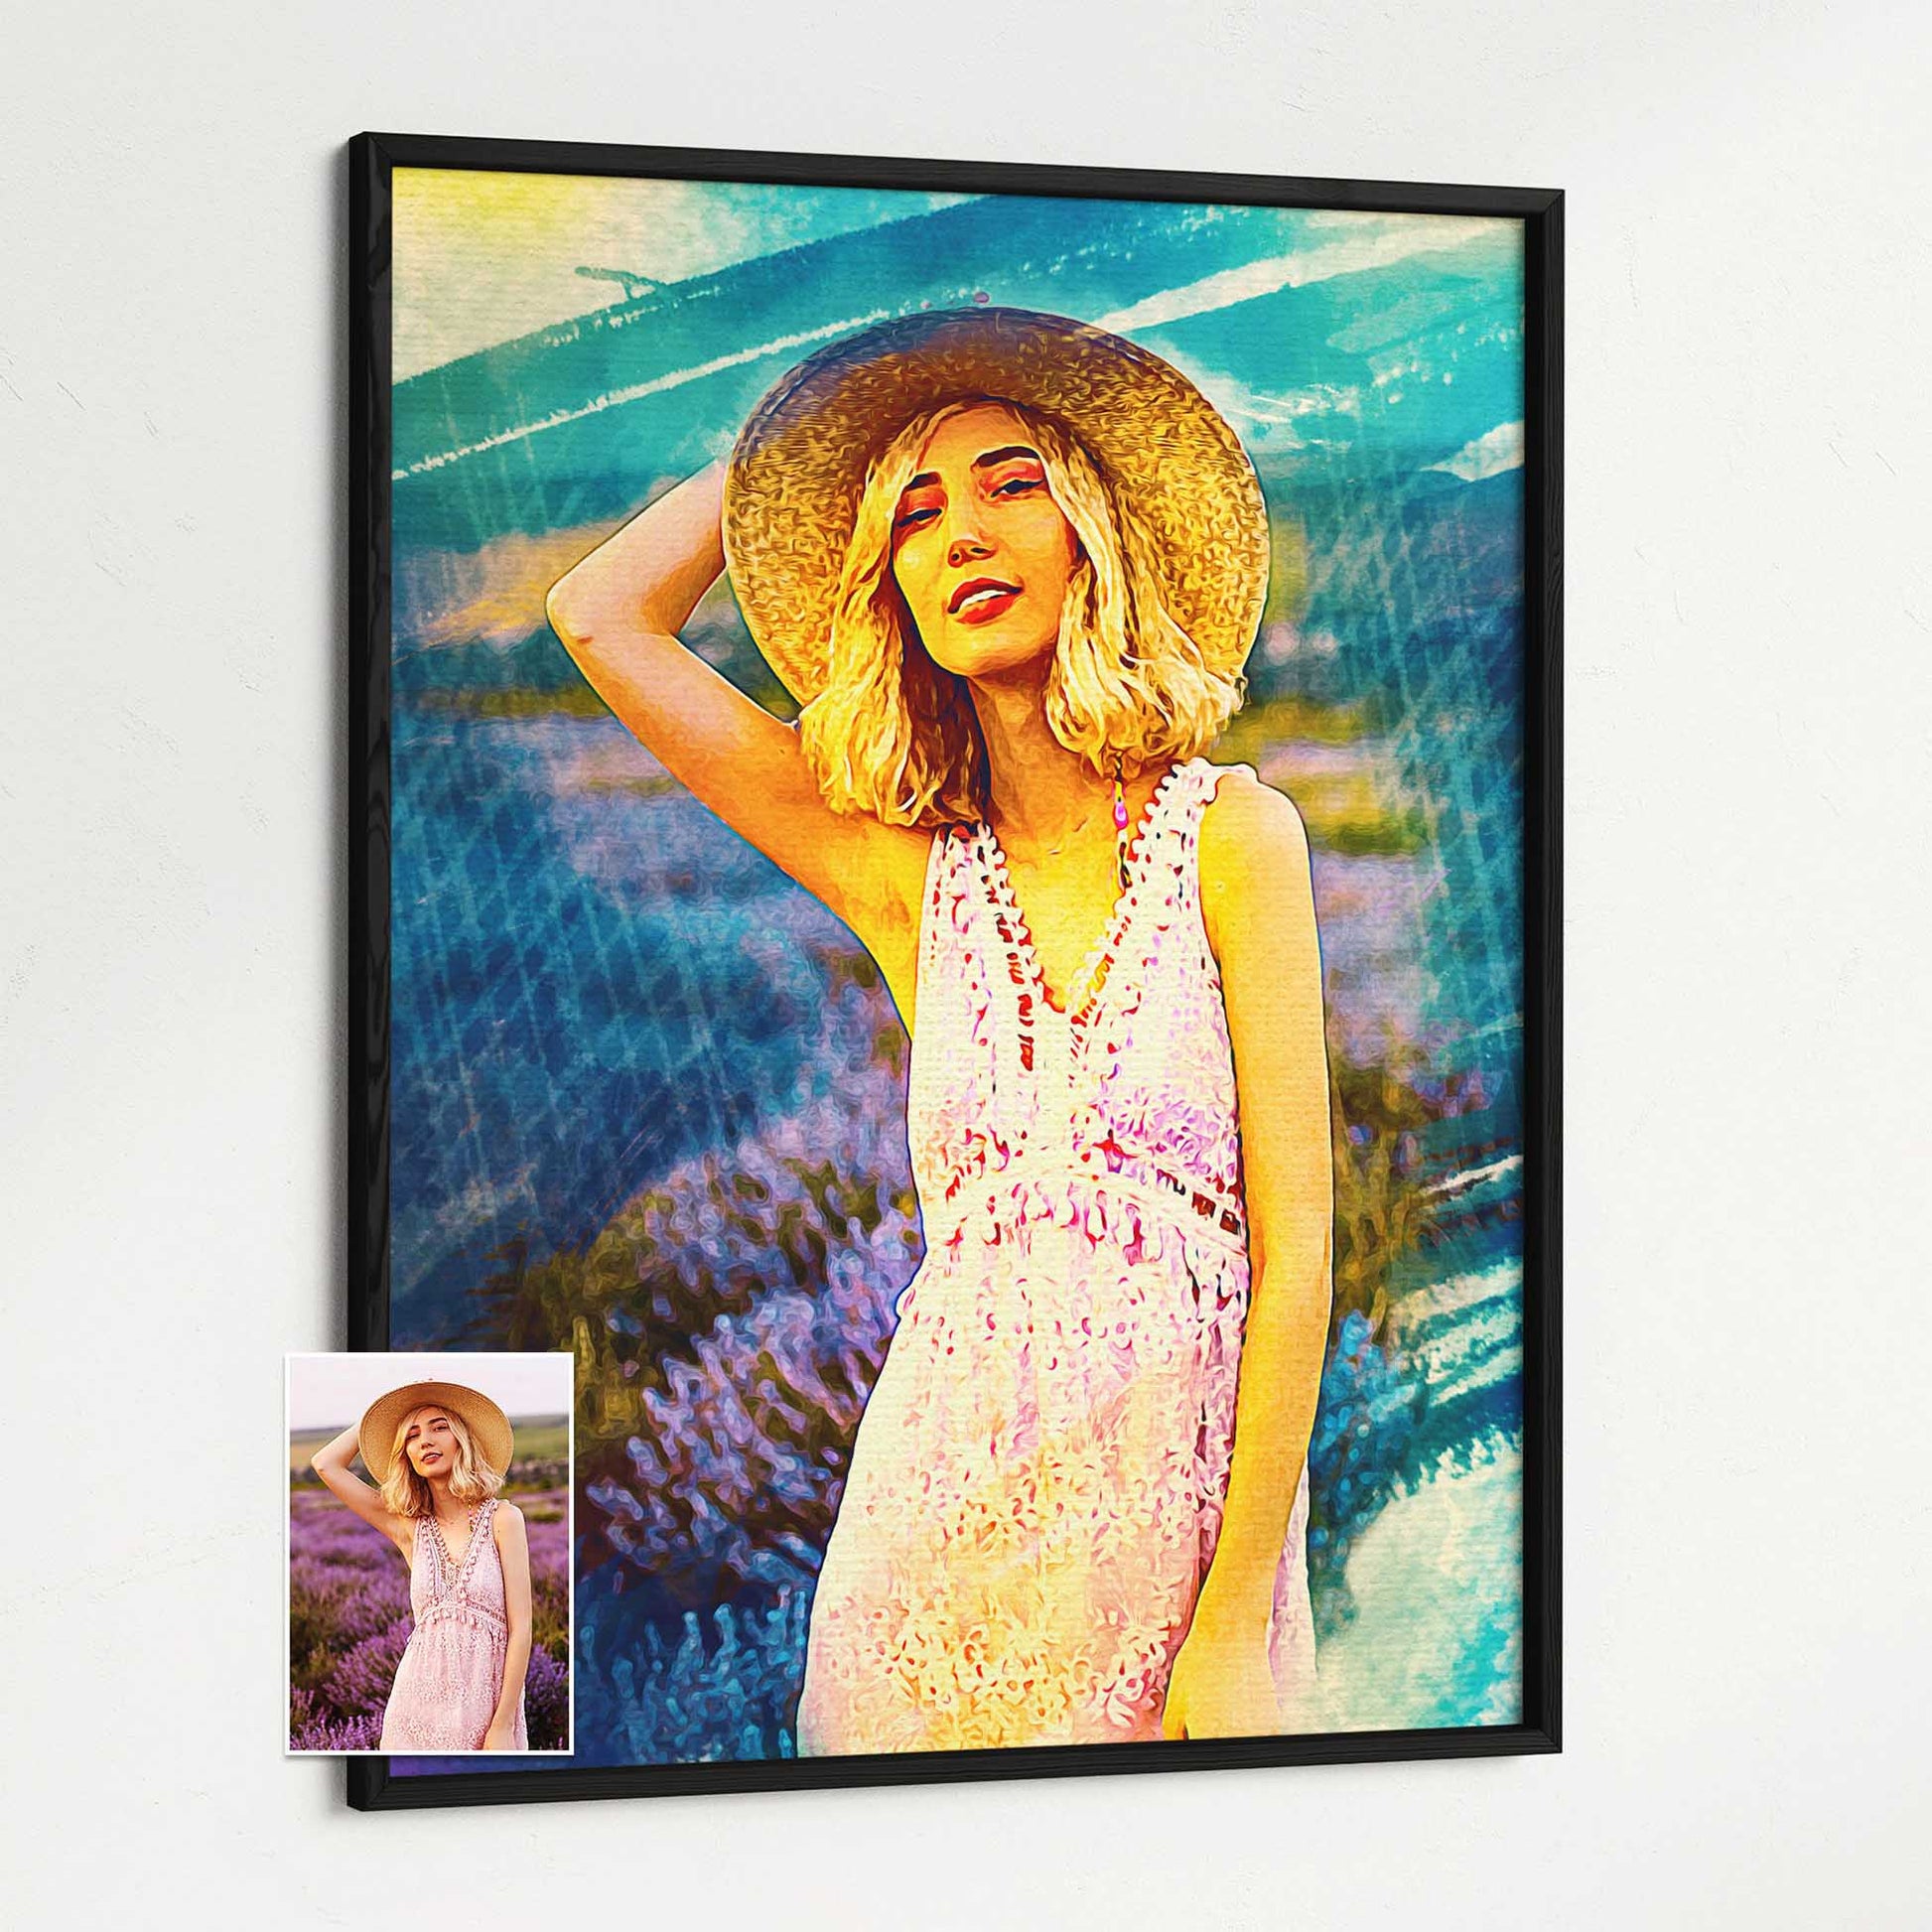 Transform your space with our Personalised Artistic Brush Painting Framed Print. This exquisite artwork, created from your photo, is a true masterpiece of design. The imaginative brushstrokes and fresh colors bring a sense of beauty